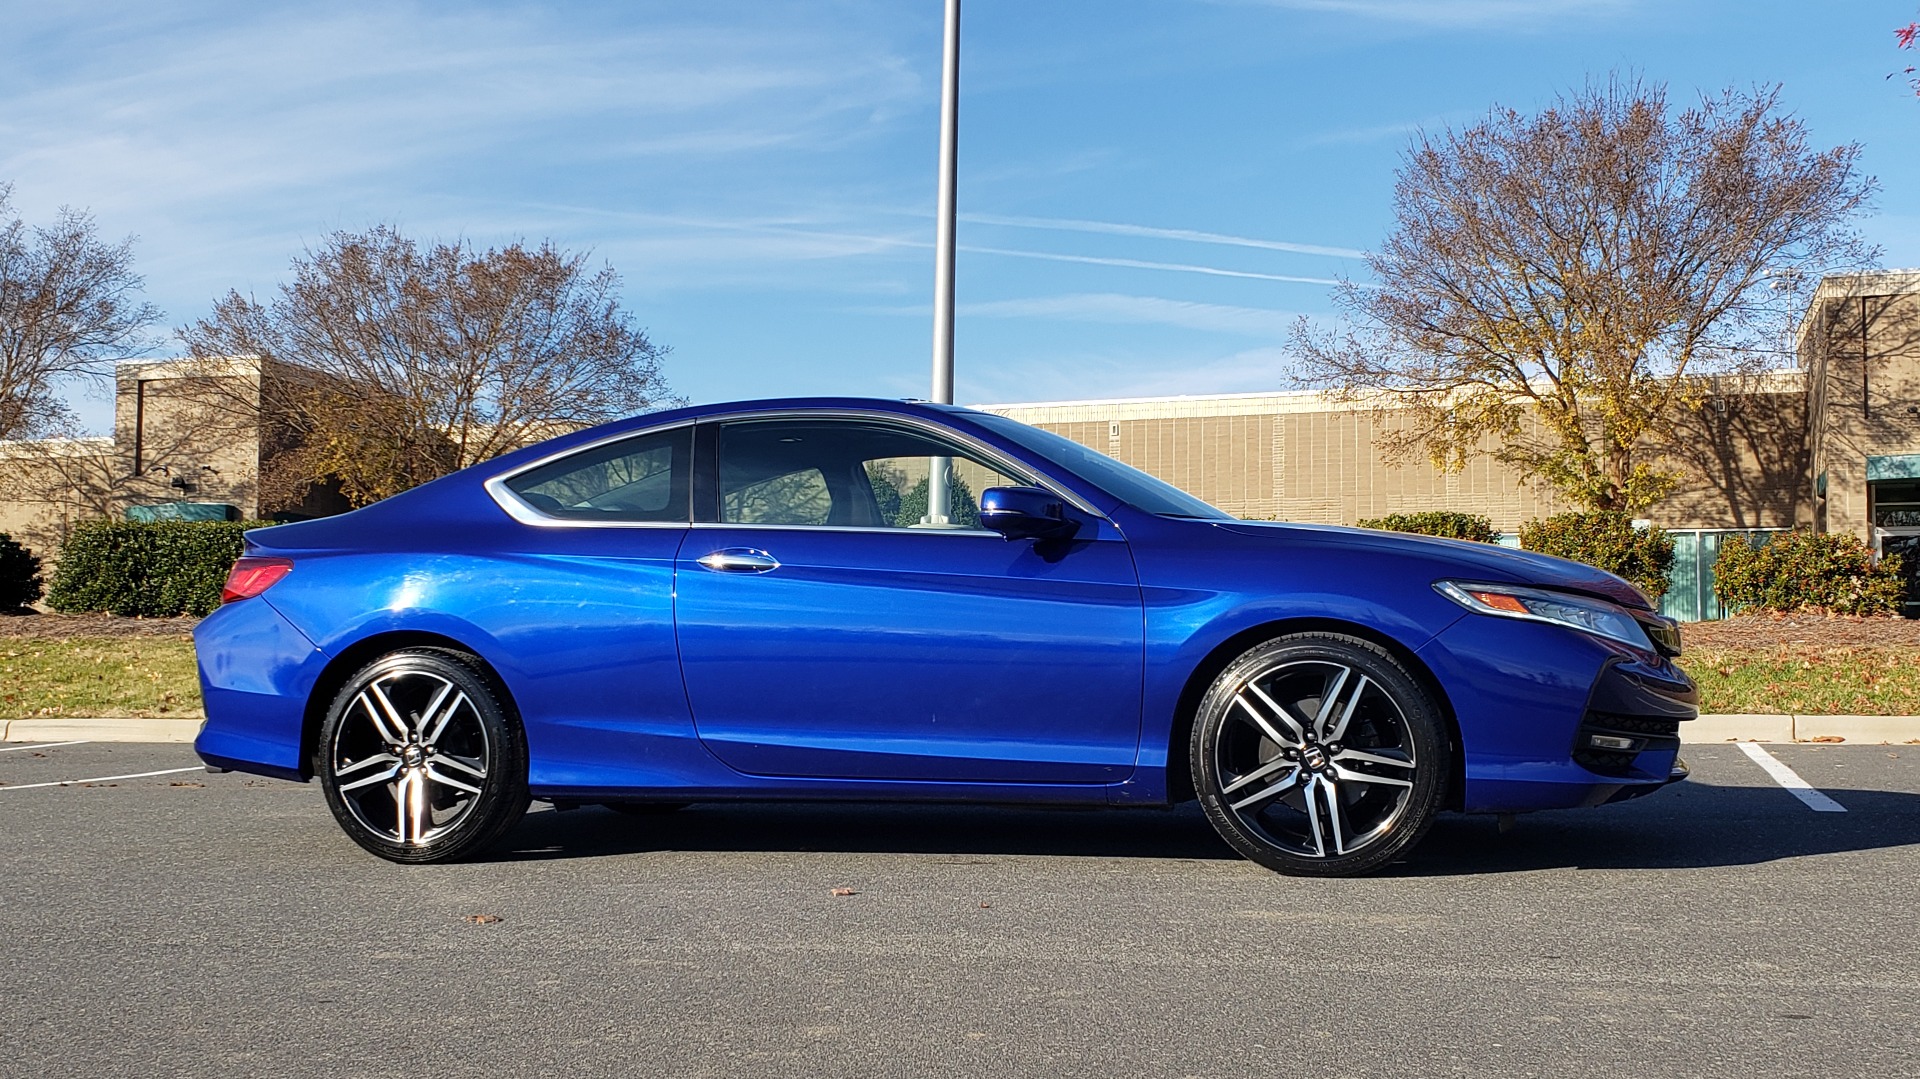 Used 2017 Honda ACCORD COUPE TOURING V6 / 2-DR / NAV / SUNROOF / LANEWATCH / CMBS for sale Sold at Formula Imports in Charlotte NC 28227 10